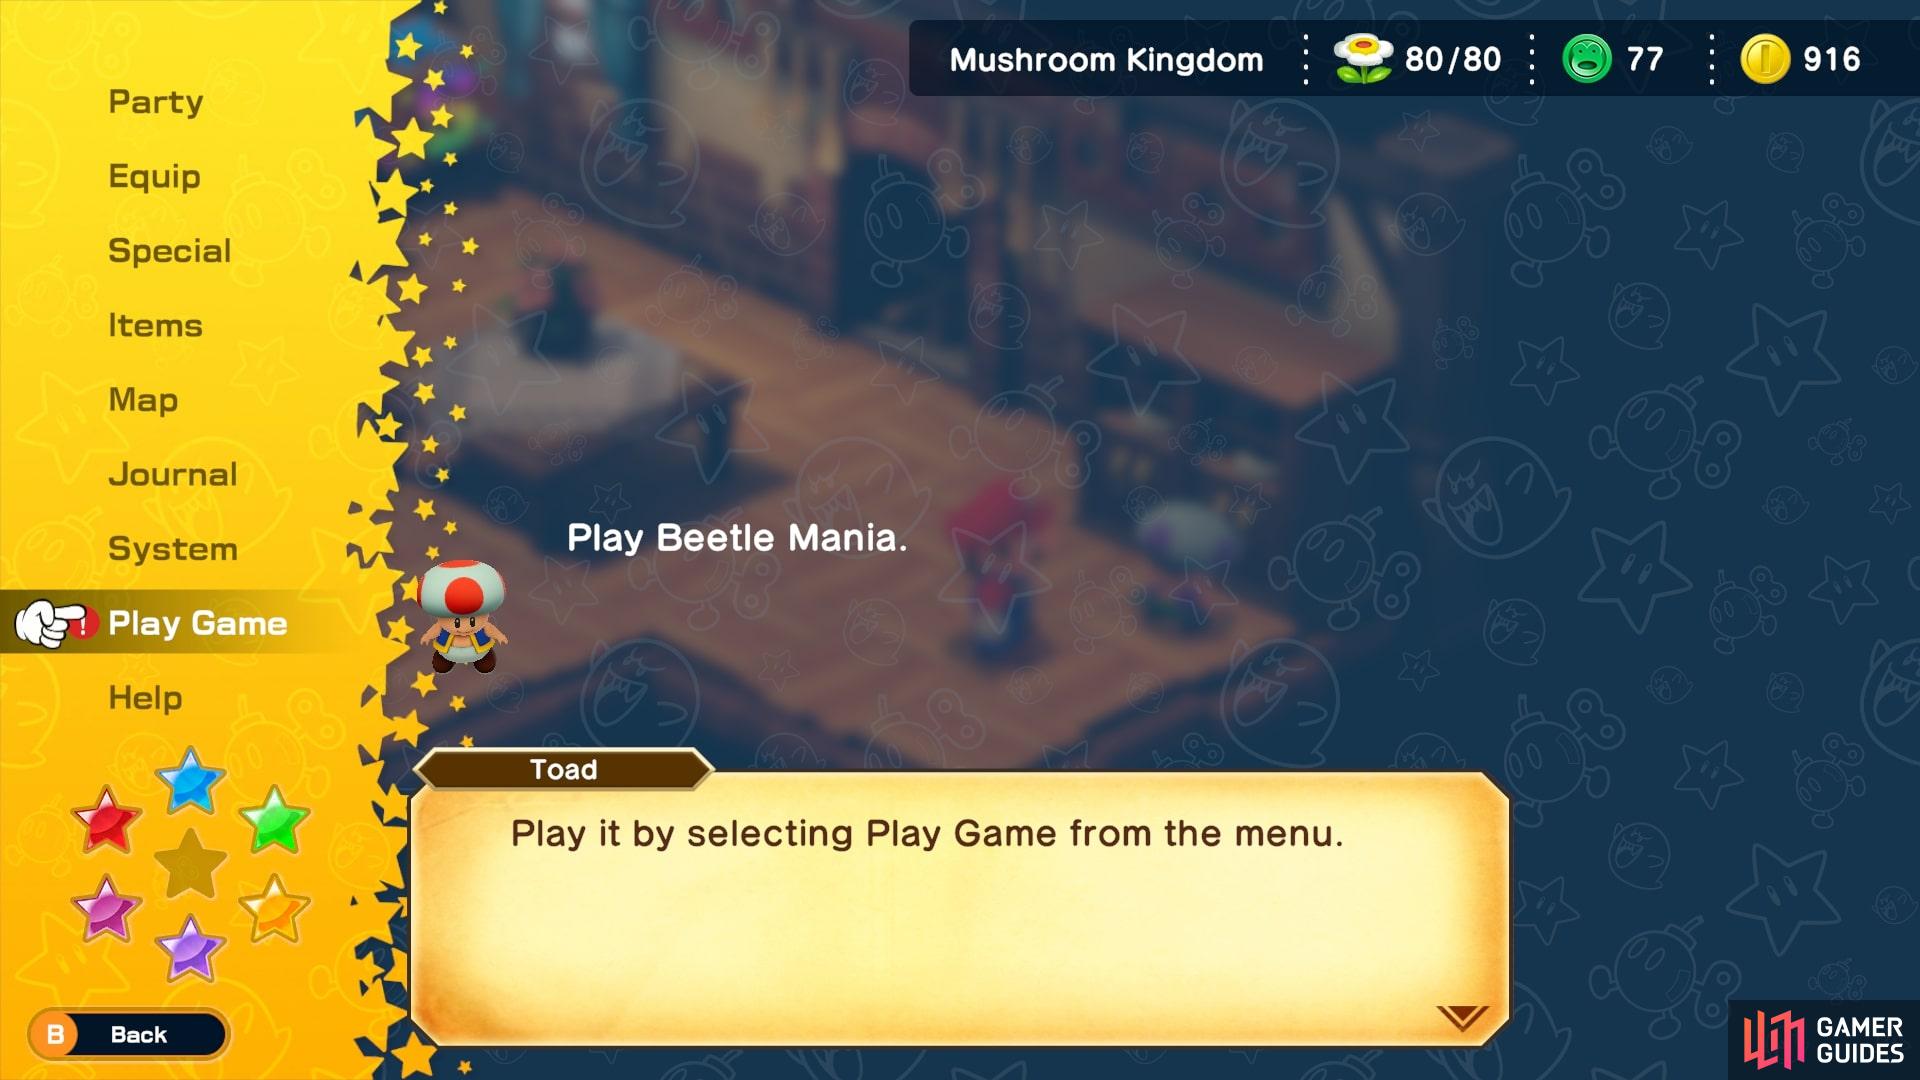 Purchase the Beetle Mania game from the NPC in the Mushroom Kingdom inn.